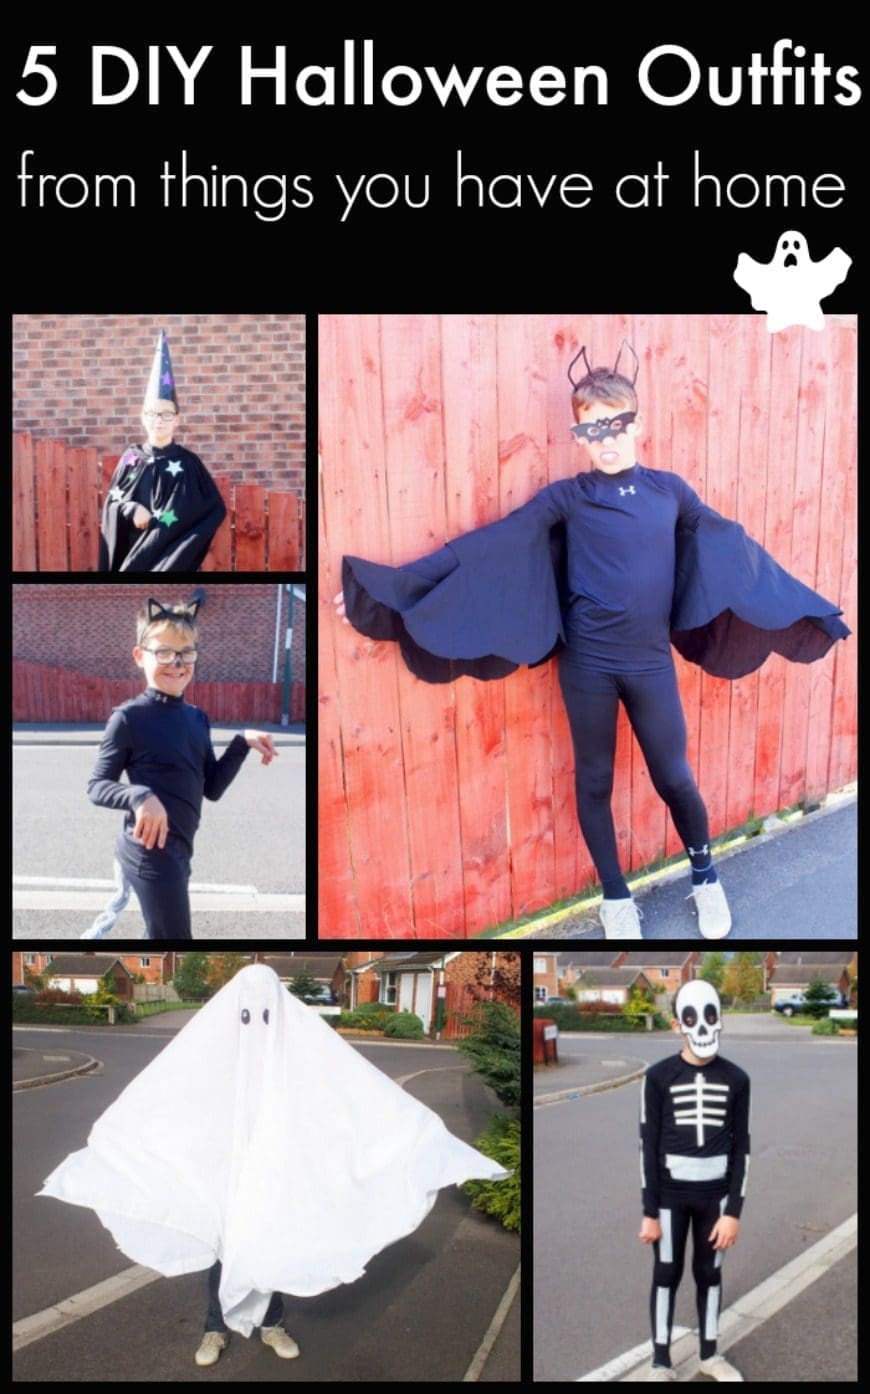 5 DIY Halloween Outfits from things you have at home Vampire Bat Costume